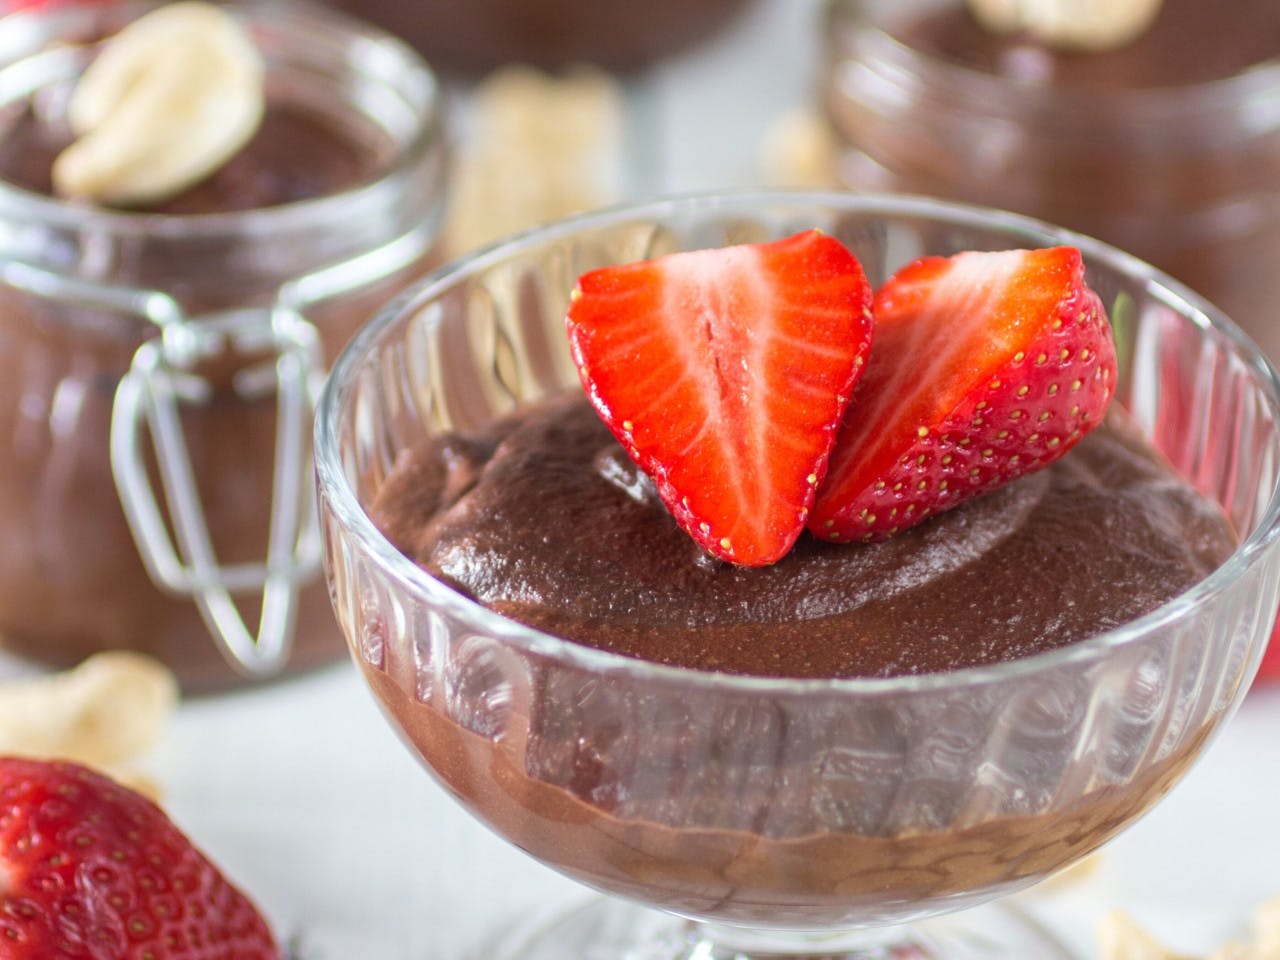 Chocolate strawberry mousse